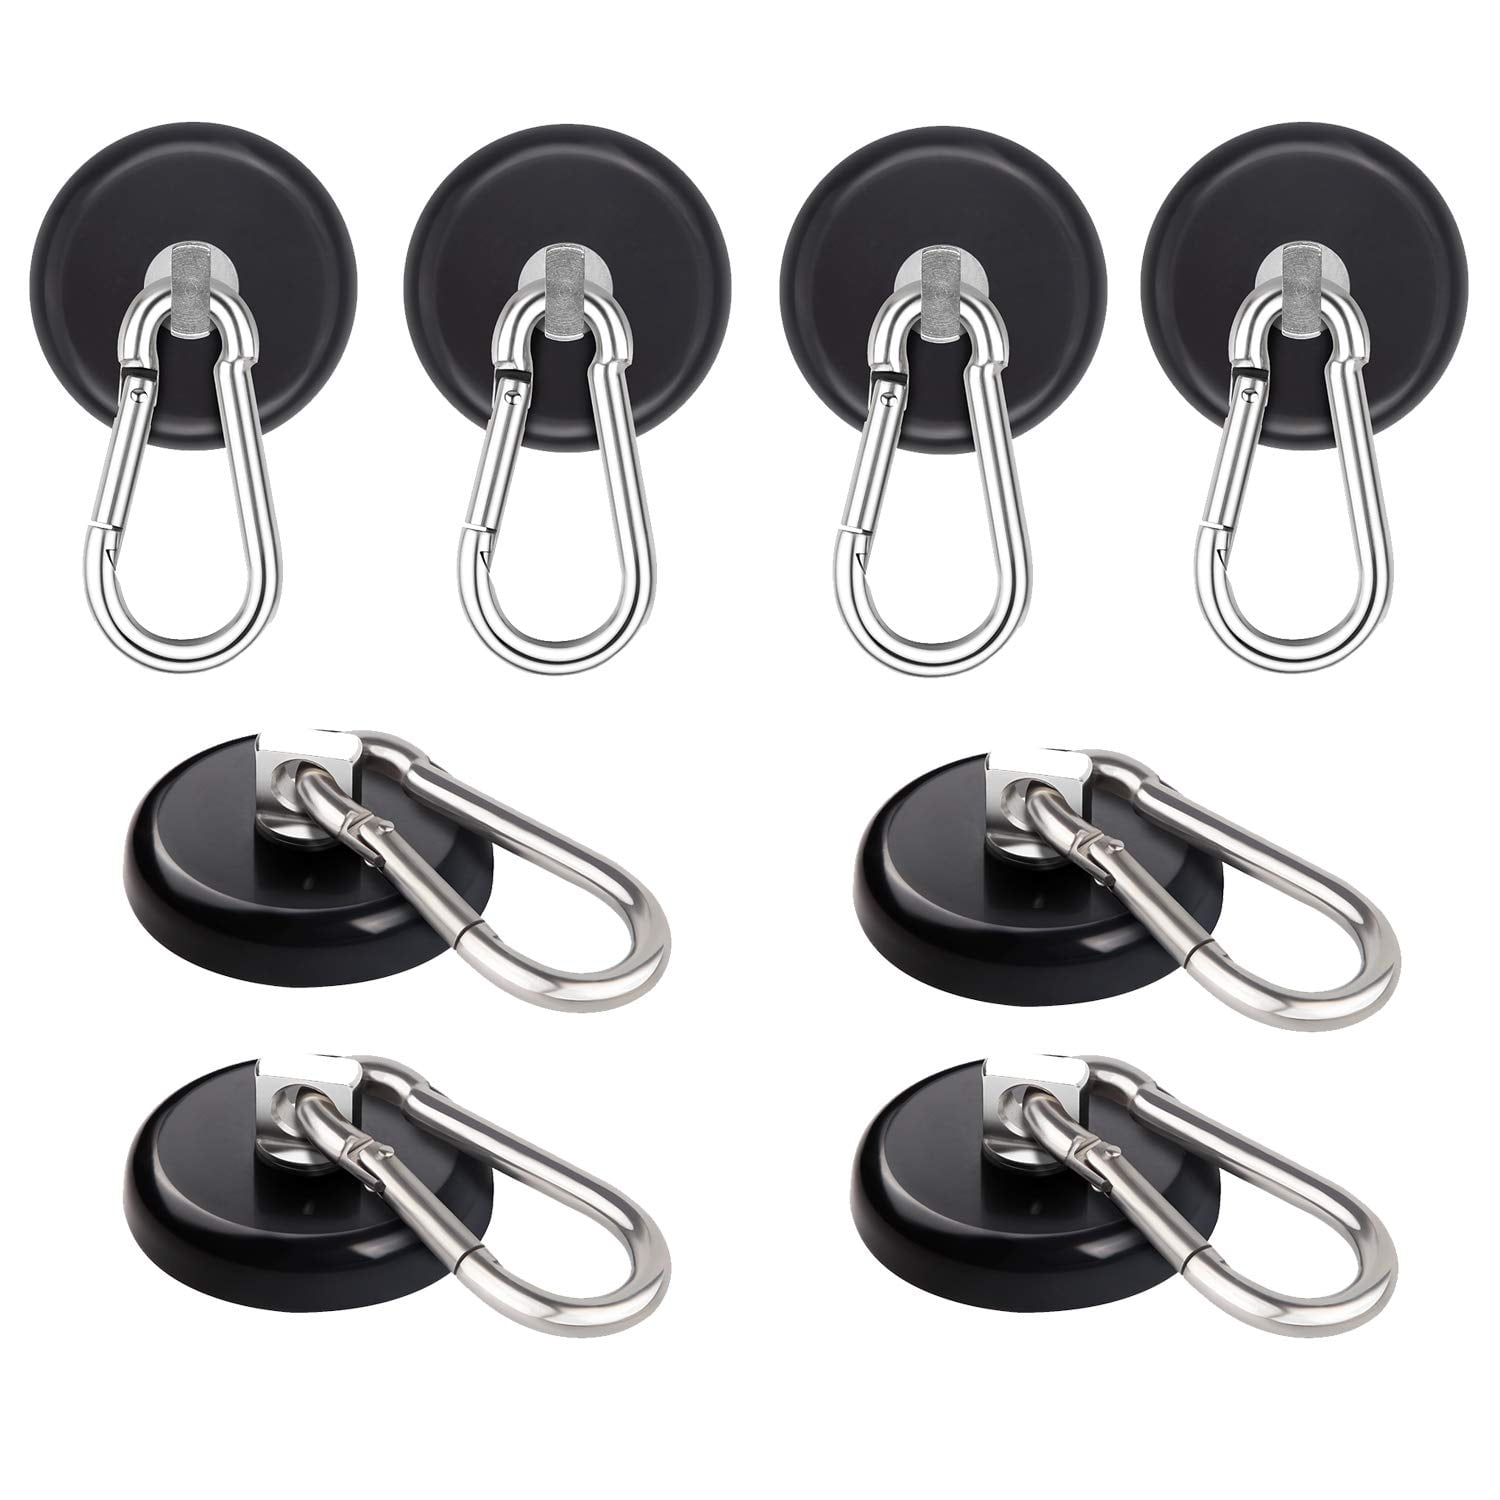 Scratch Proof! Heavy Duty Super Strong Neodymium Magnetic Hook & Carabiner Set 